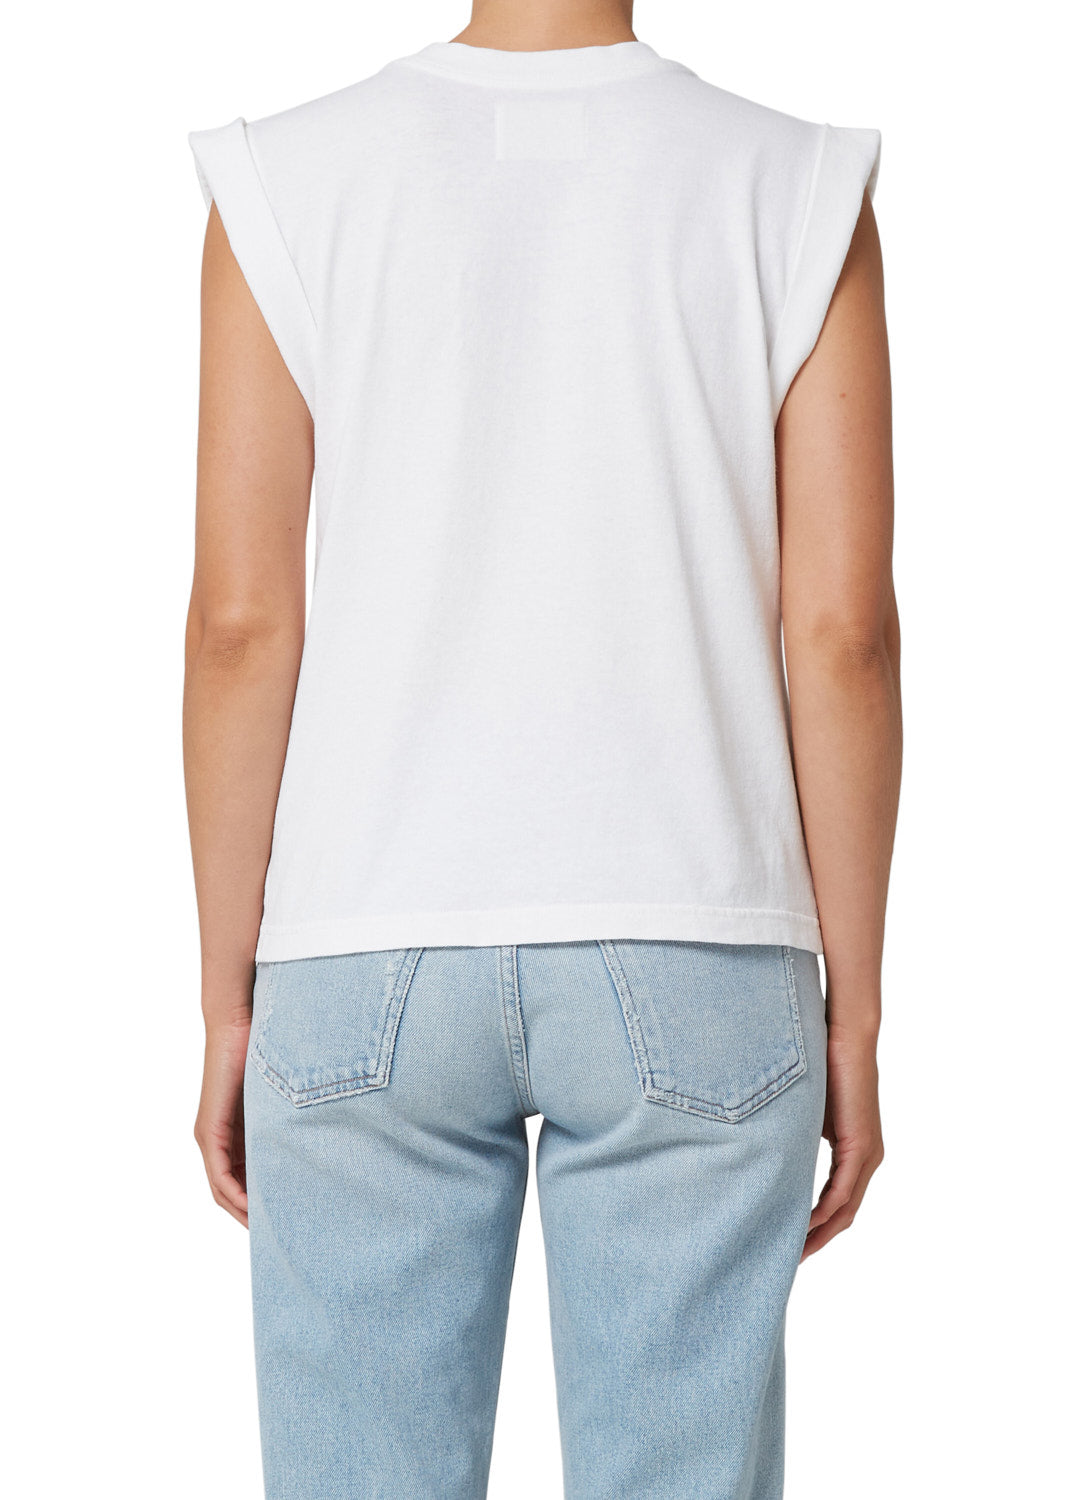 Citizens of Humanity - Eugenie Tee in White